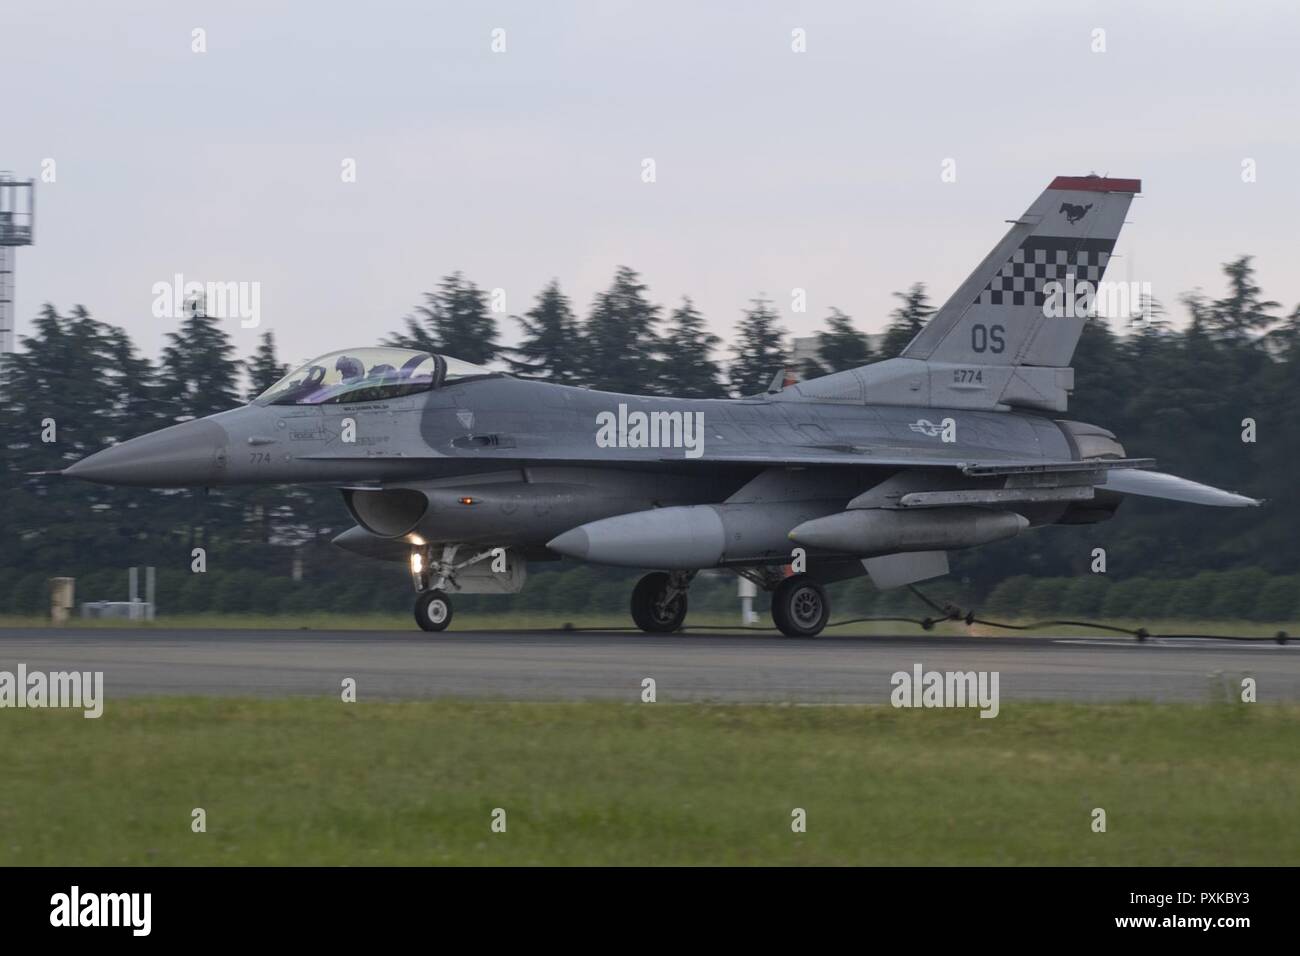 An F-16 Fighting falcon assigned to the 36th Fighter Squadron, Osan Air Base, engages a barrier during an annual certification test of the Aircraft Arresting System at Yokota Air Base, Japan, June 1, 2017. Airmen from the 374 CES and 374th Operations Support Squadron are responsible for setting up the system and logging any deficiencies during the test. Stock Photo